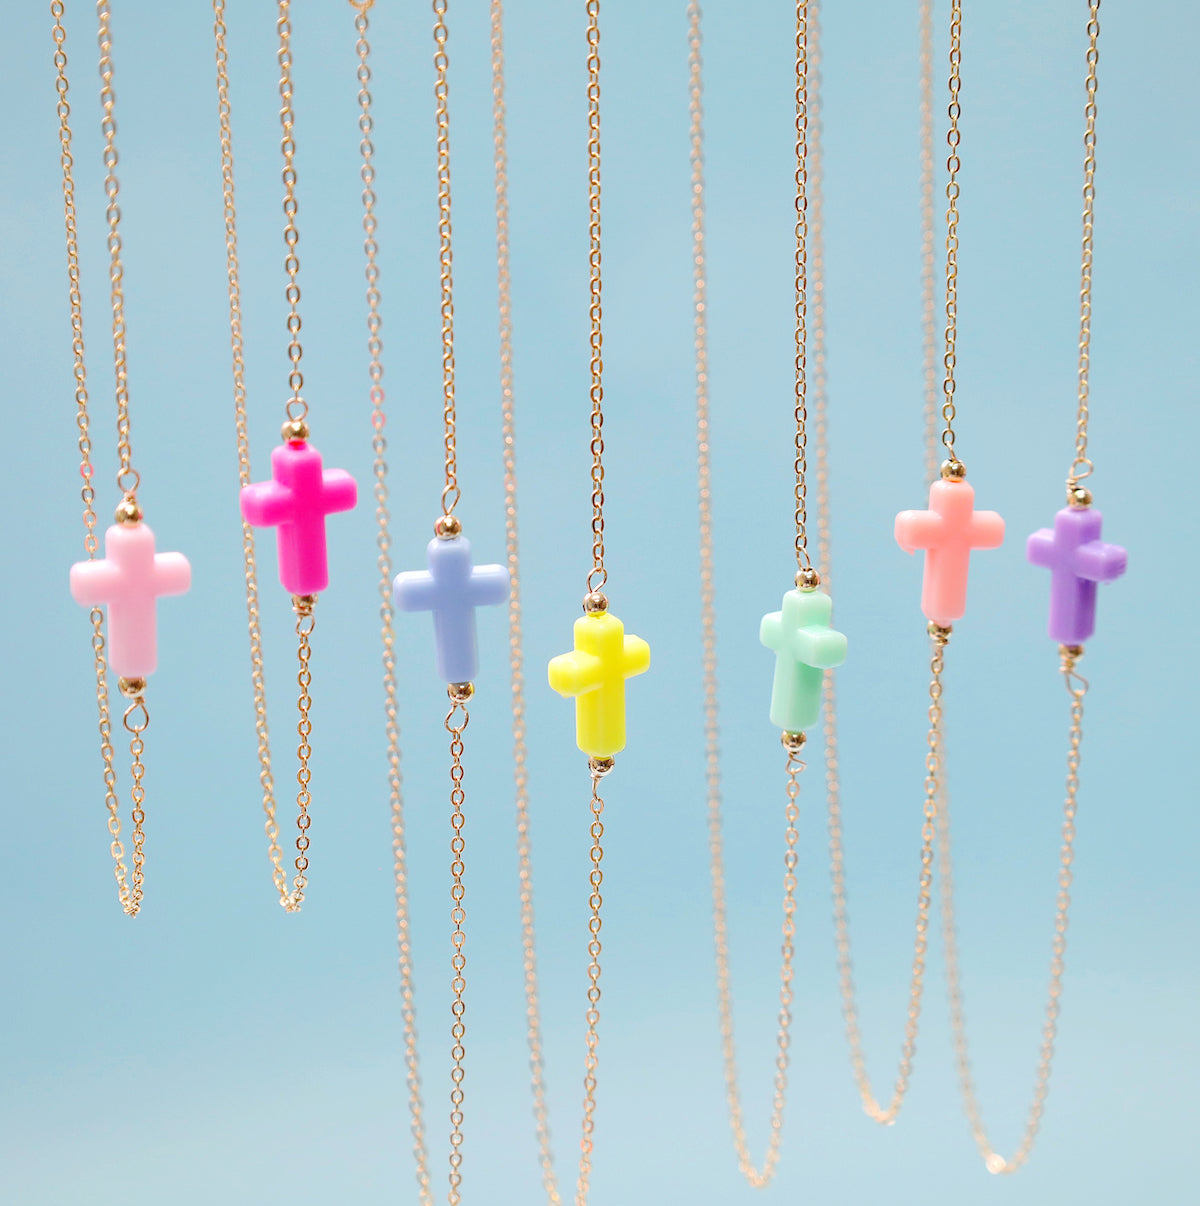 Rainbow Blessed Necklace